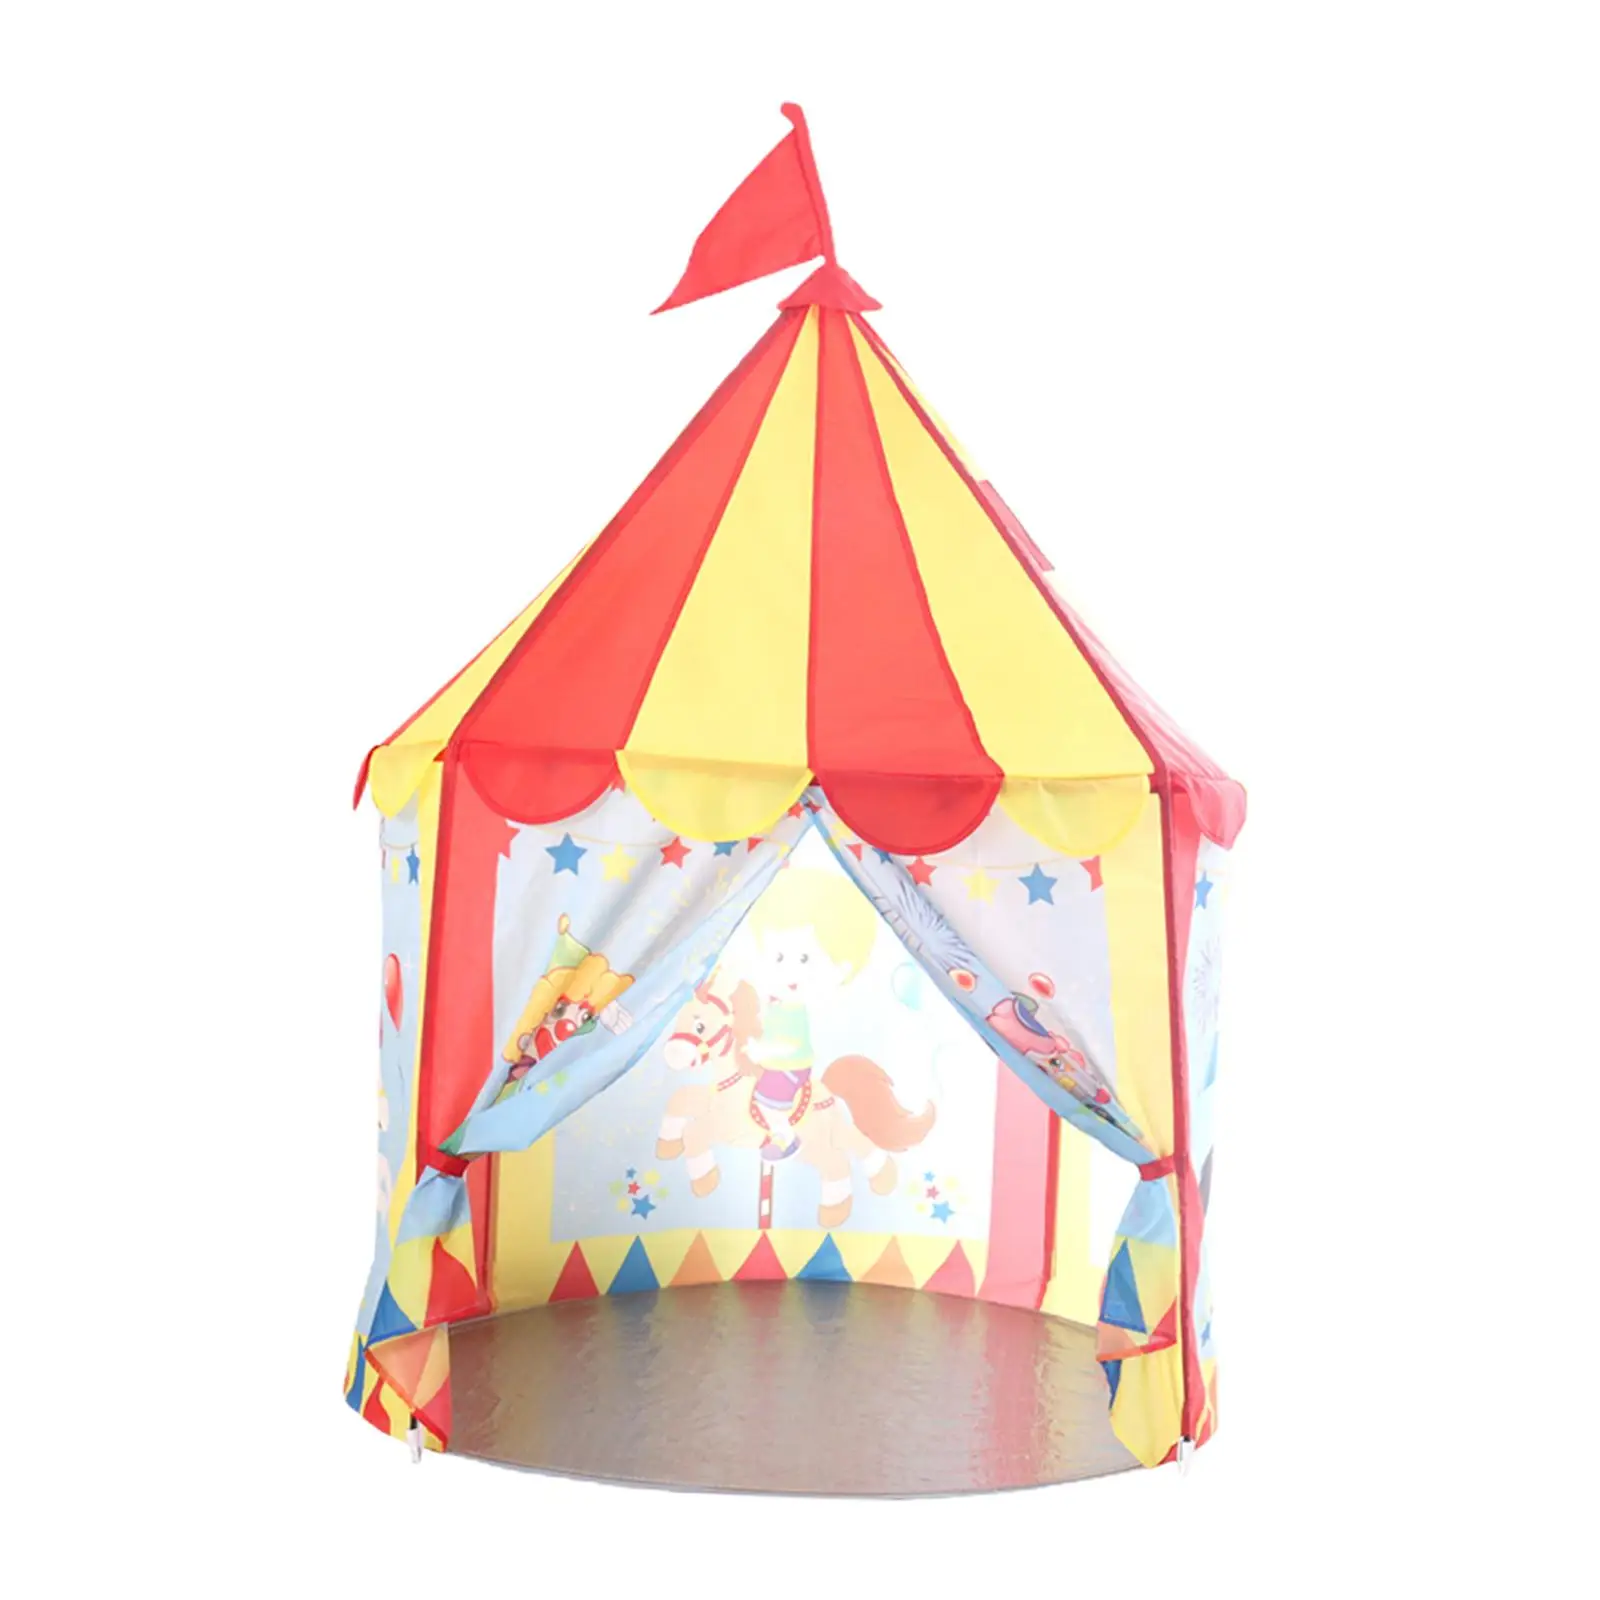 Play Tent for Kids Portable Indoor Outdoor Use Play Teepee Prince Castle Tent for garden Camping Yard Baby